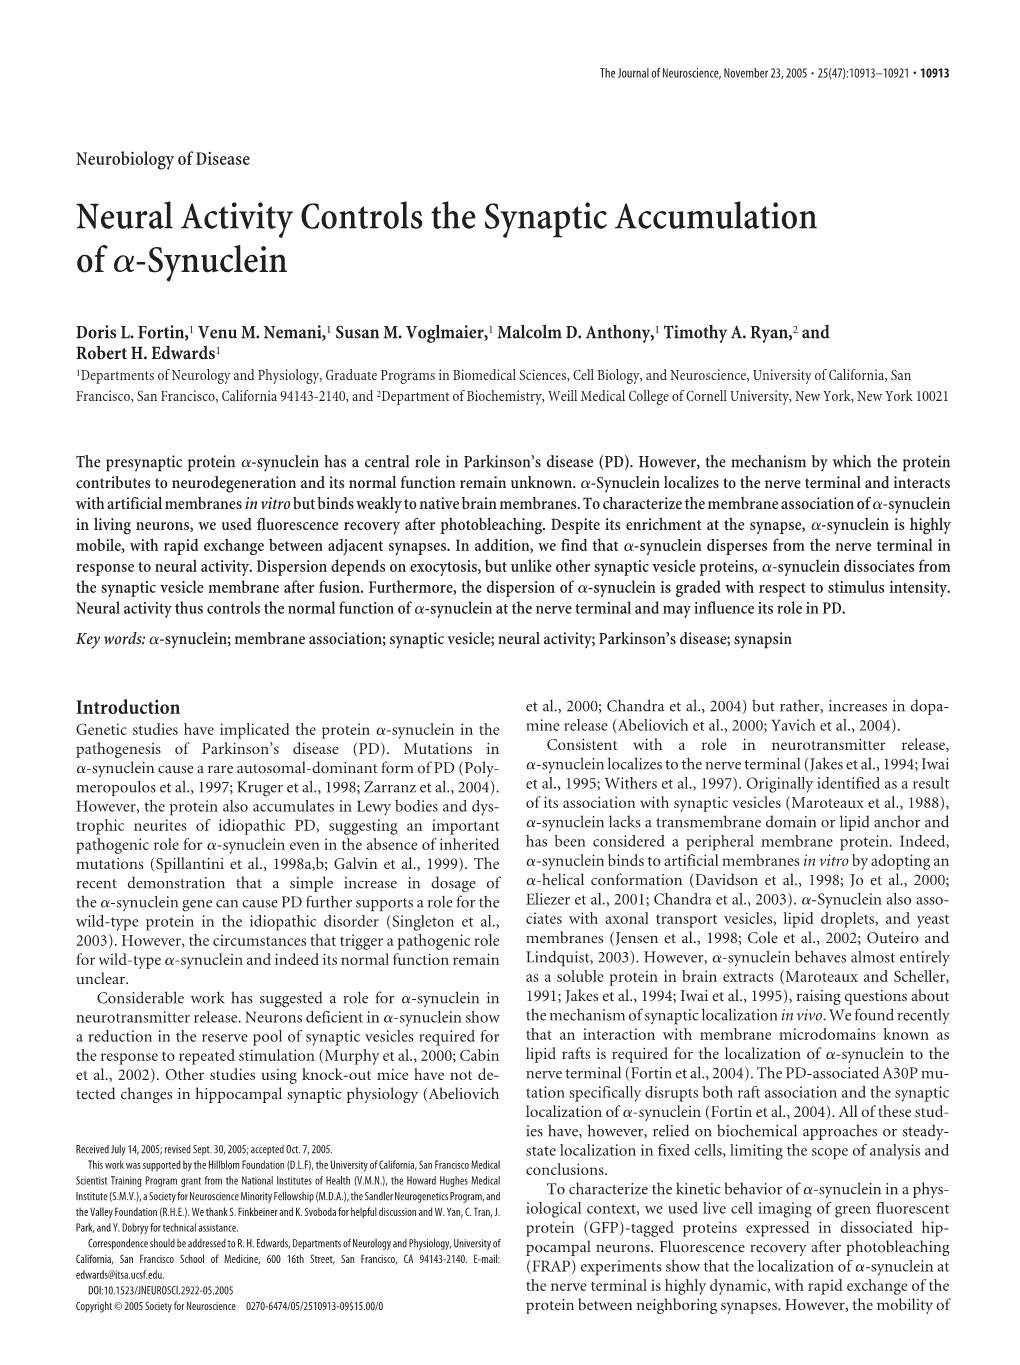 Neural Activity Controls the Synaptic Accumulation Ofα-Synuclein